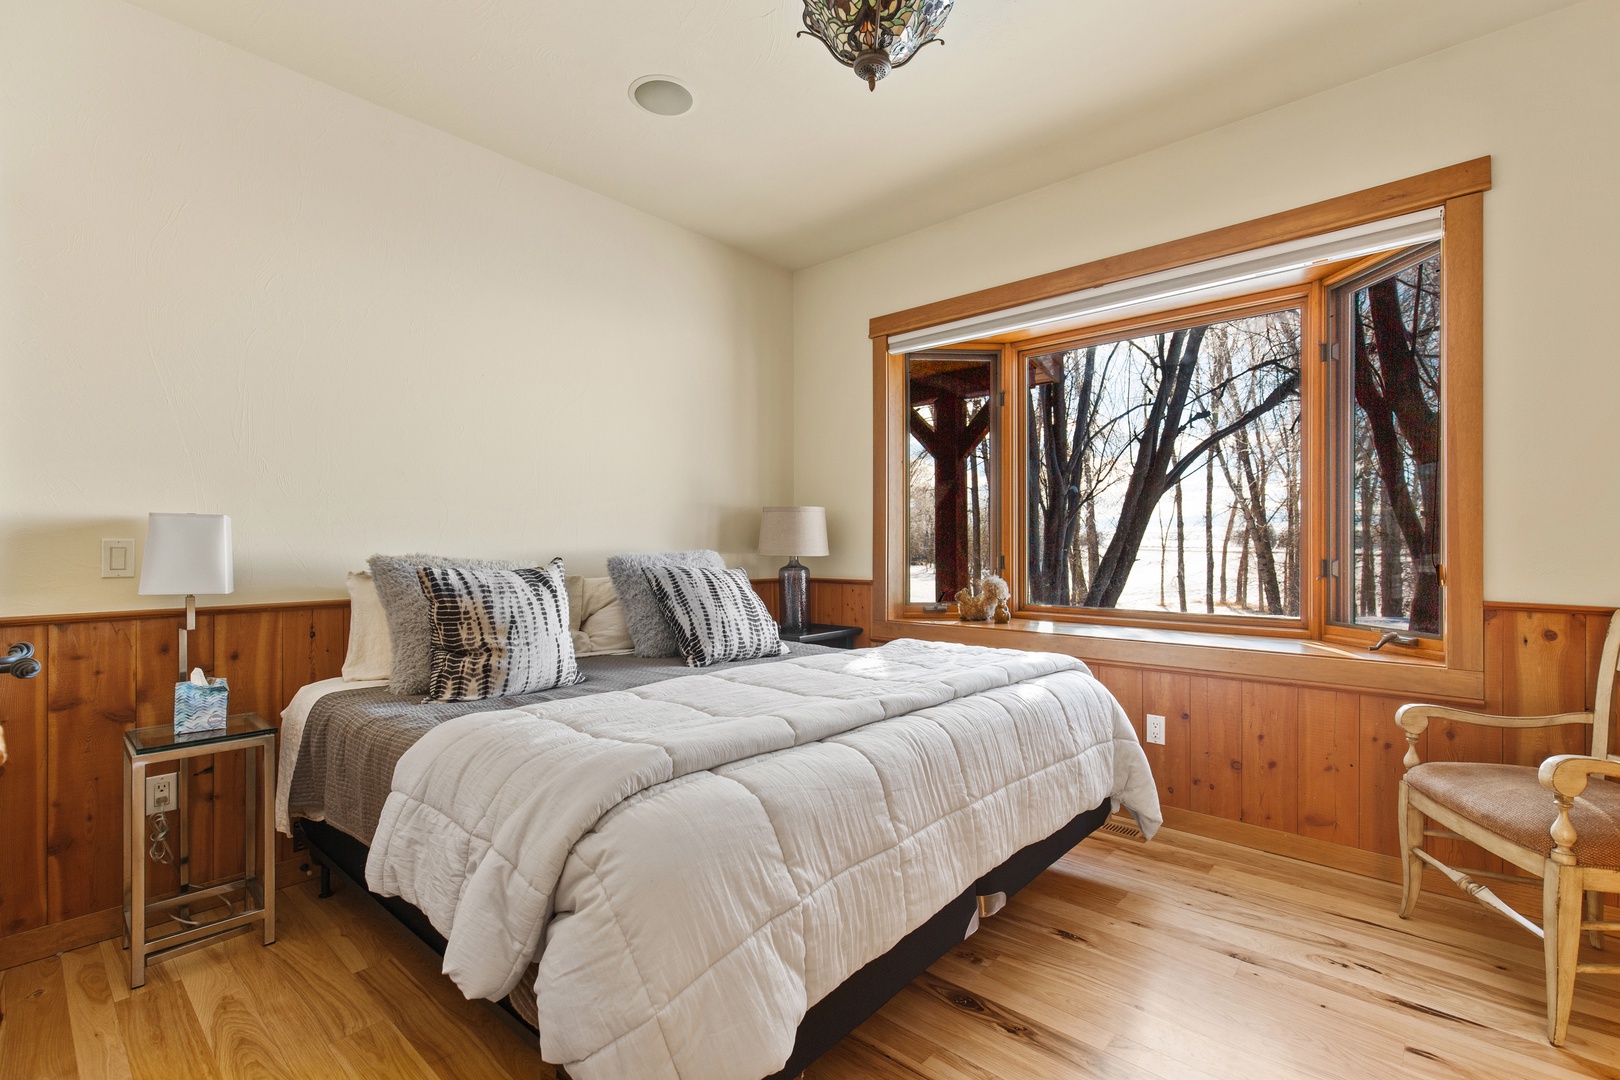 Bozeman Vacation Rentals, The Woodland Oasis - Primary bedroom with king bed and view to the woods